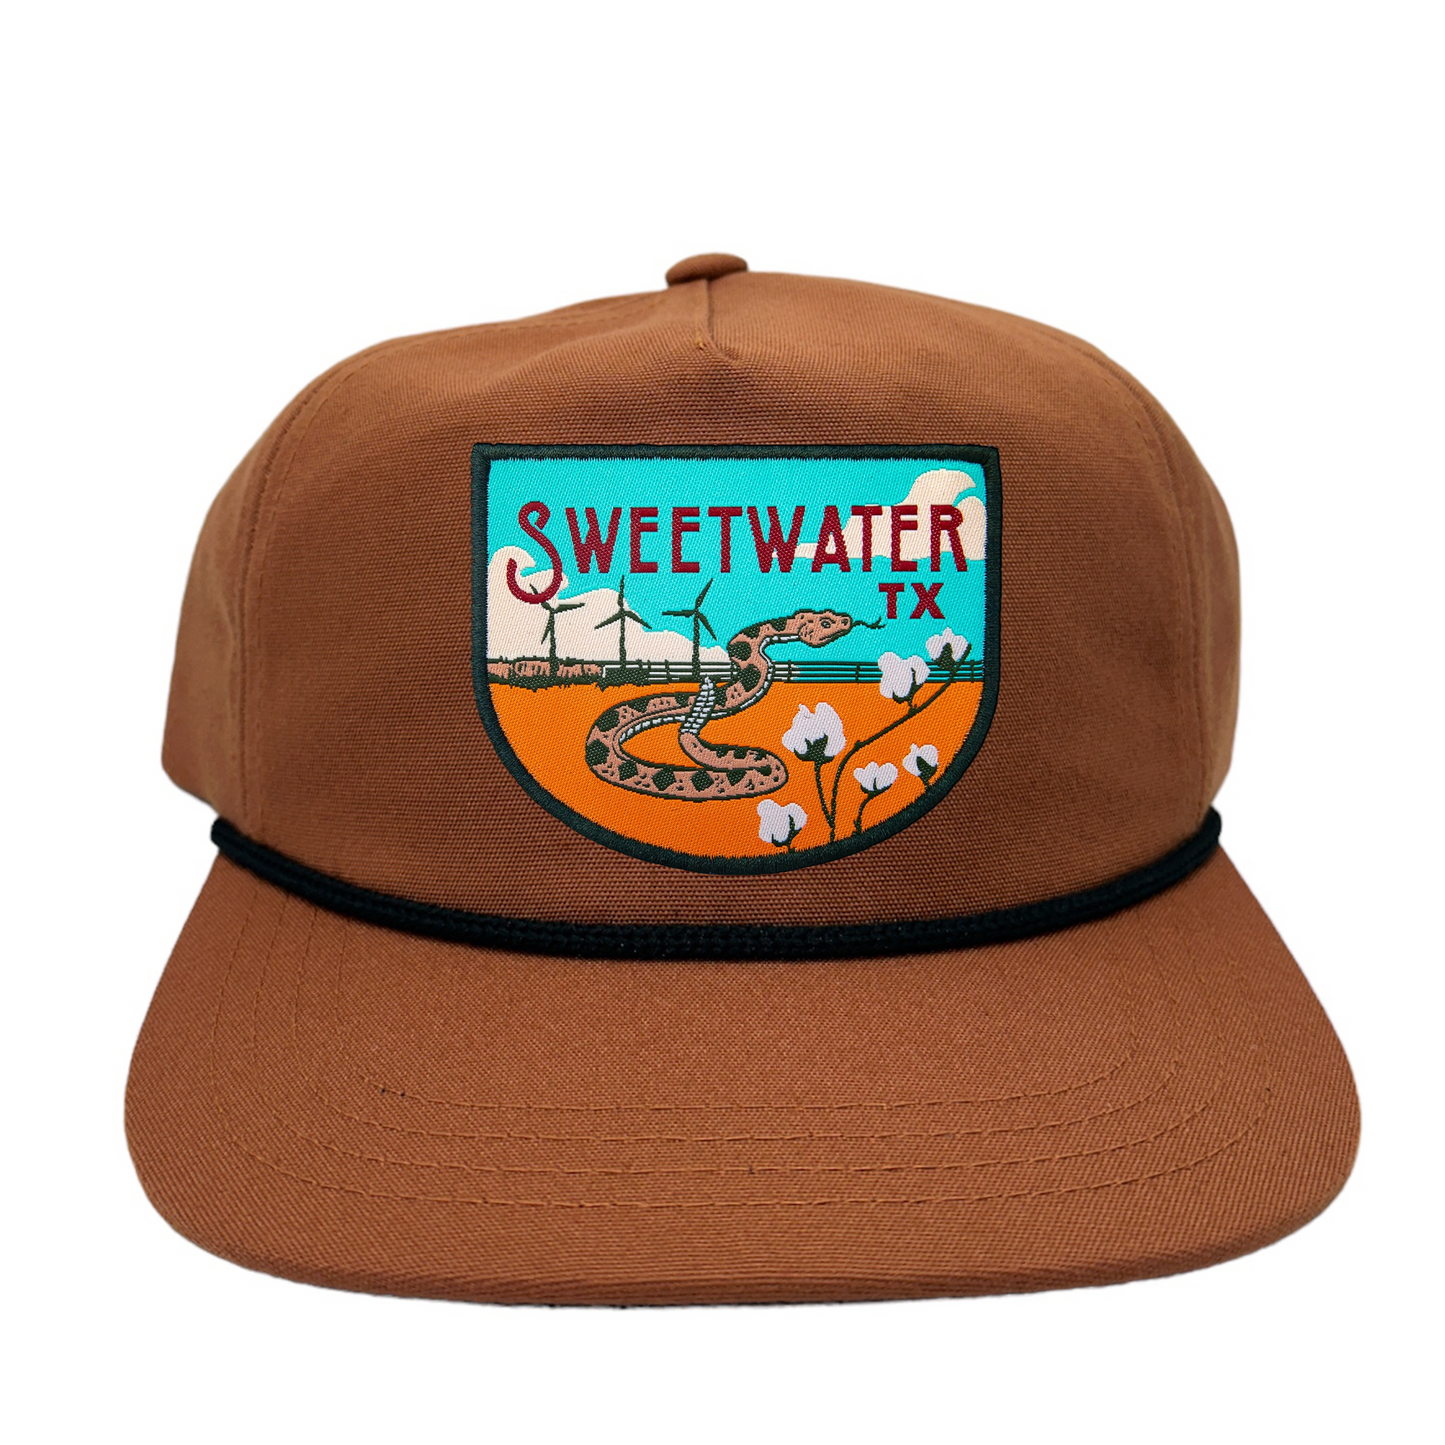 Sweetwater, TX Snapback